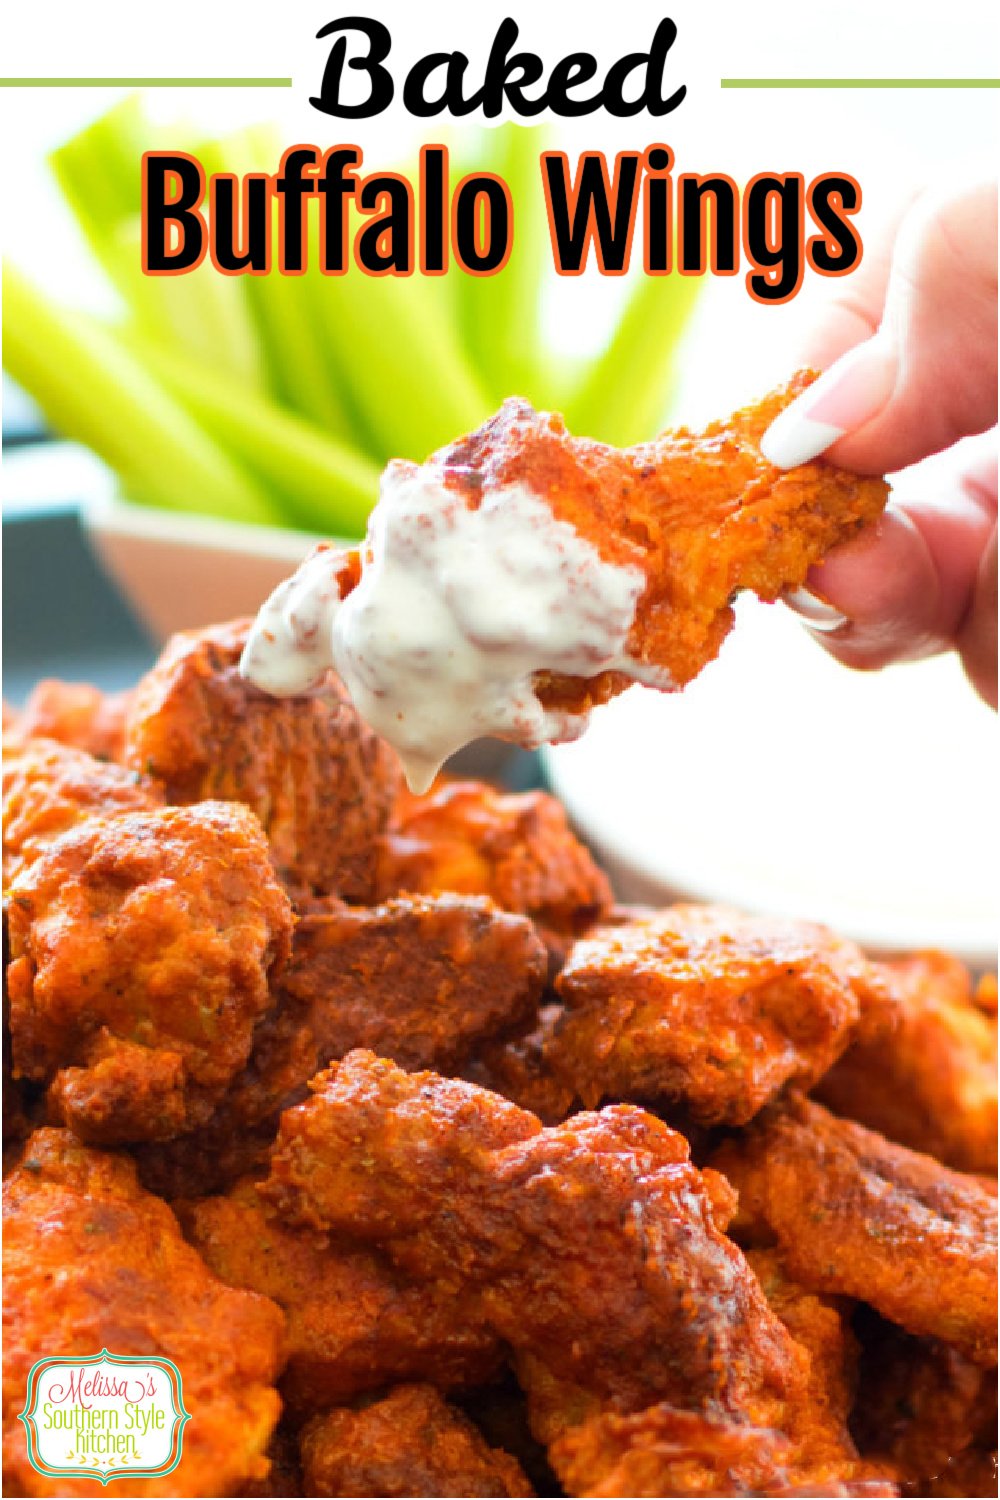 Skip the oil and make this crispy Baked Buffalo Wings Recipe in the oven in a snap #wings #buffalowings #chickenwings #bakedbuffalowings #chicken #chickenrecipes #easywings #easyrecipes #partyfood #appetizer #classicbuffalowingsrecipe #southernrecipes #bestbuffalowingsrecipe #southernfood #melissassouthernstylekitchen